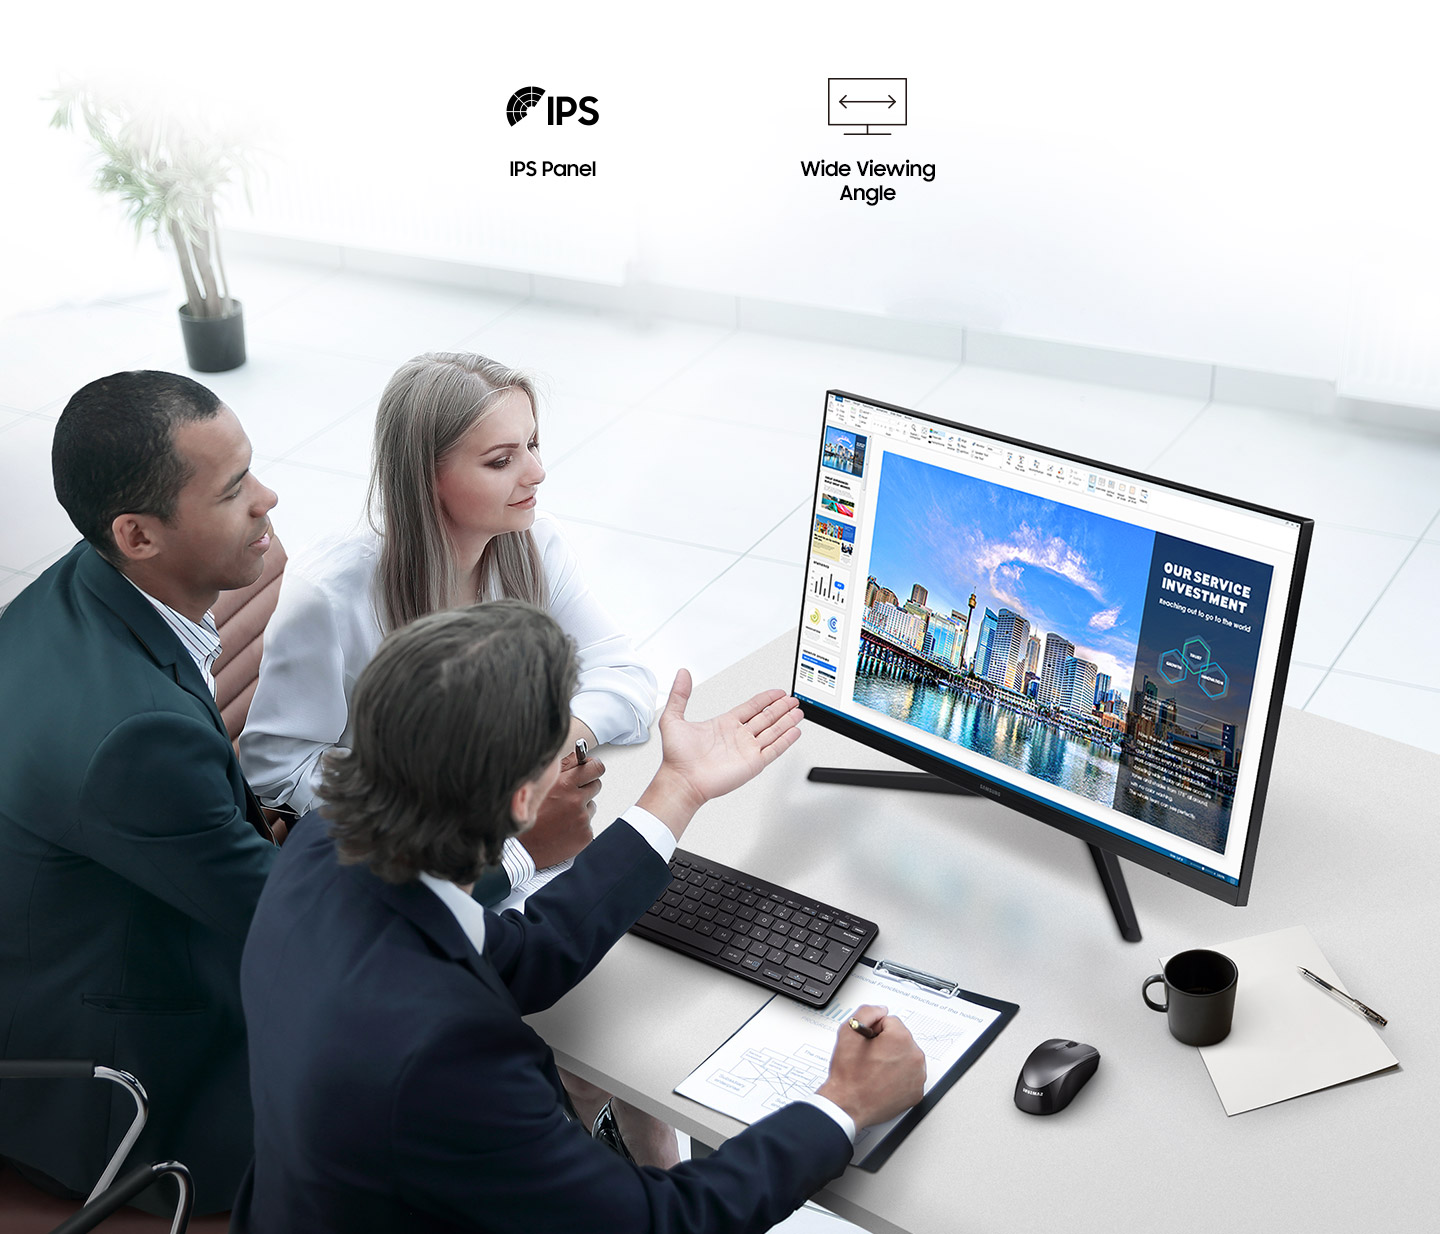 There are IPS Panel and Wide Viewing Angle icons. Three people are sitting around the monitor with the monitor in the middle, looking at the monitor and having a conversation.